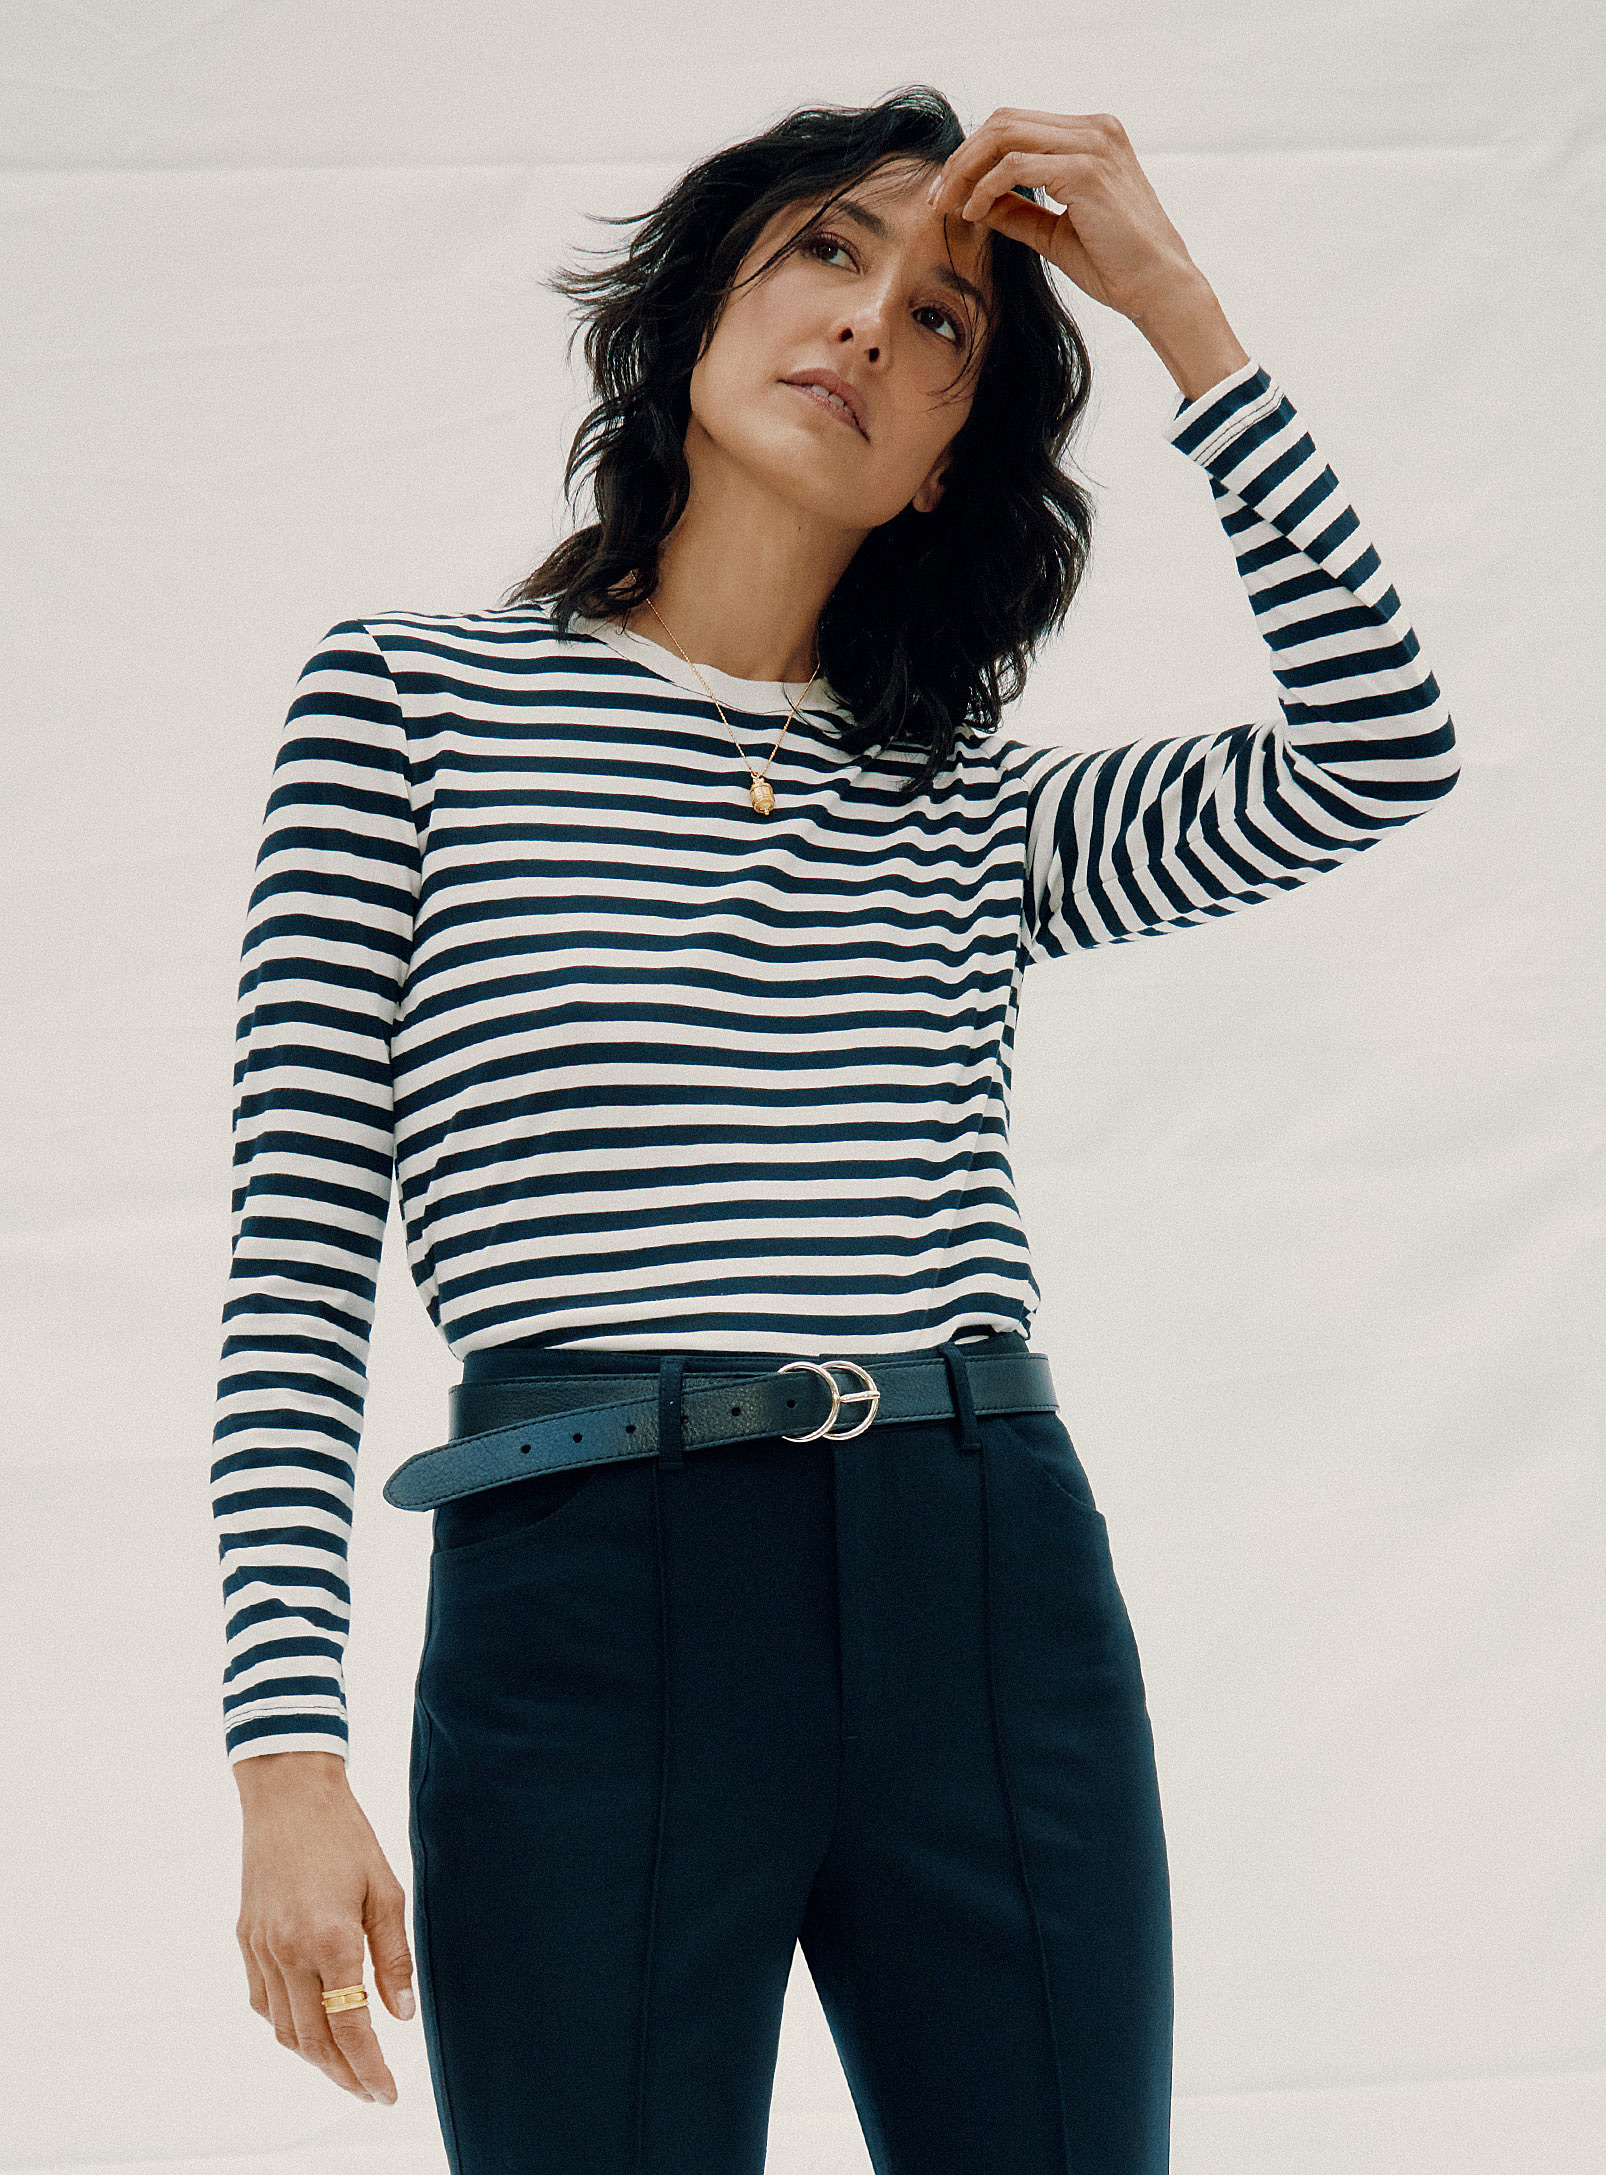 Contemporaine Contrasting Stripes T-shirt In Black And White